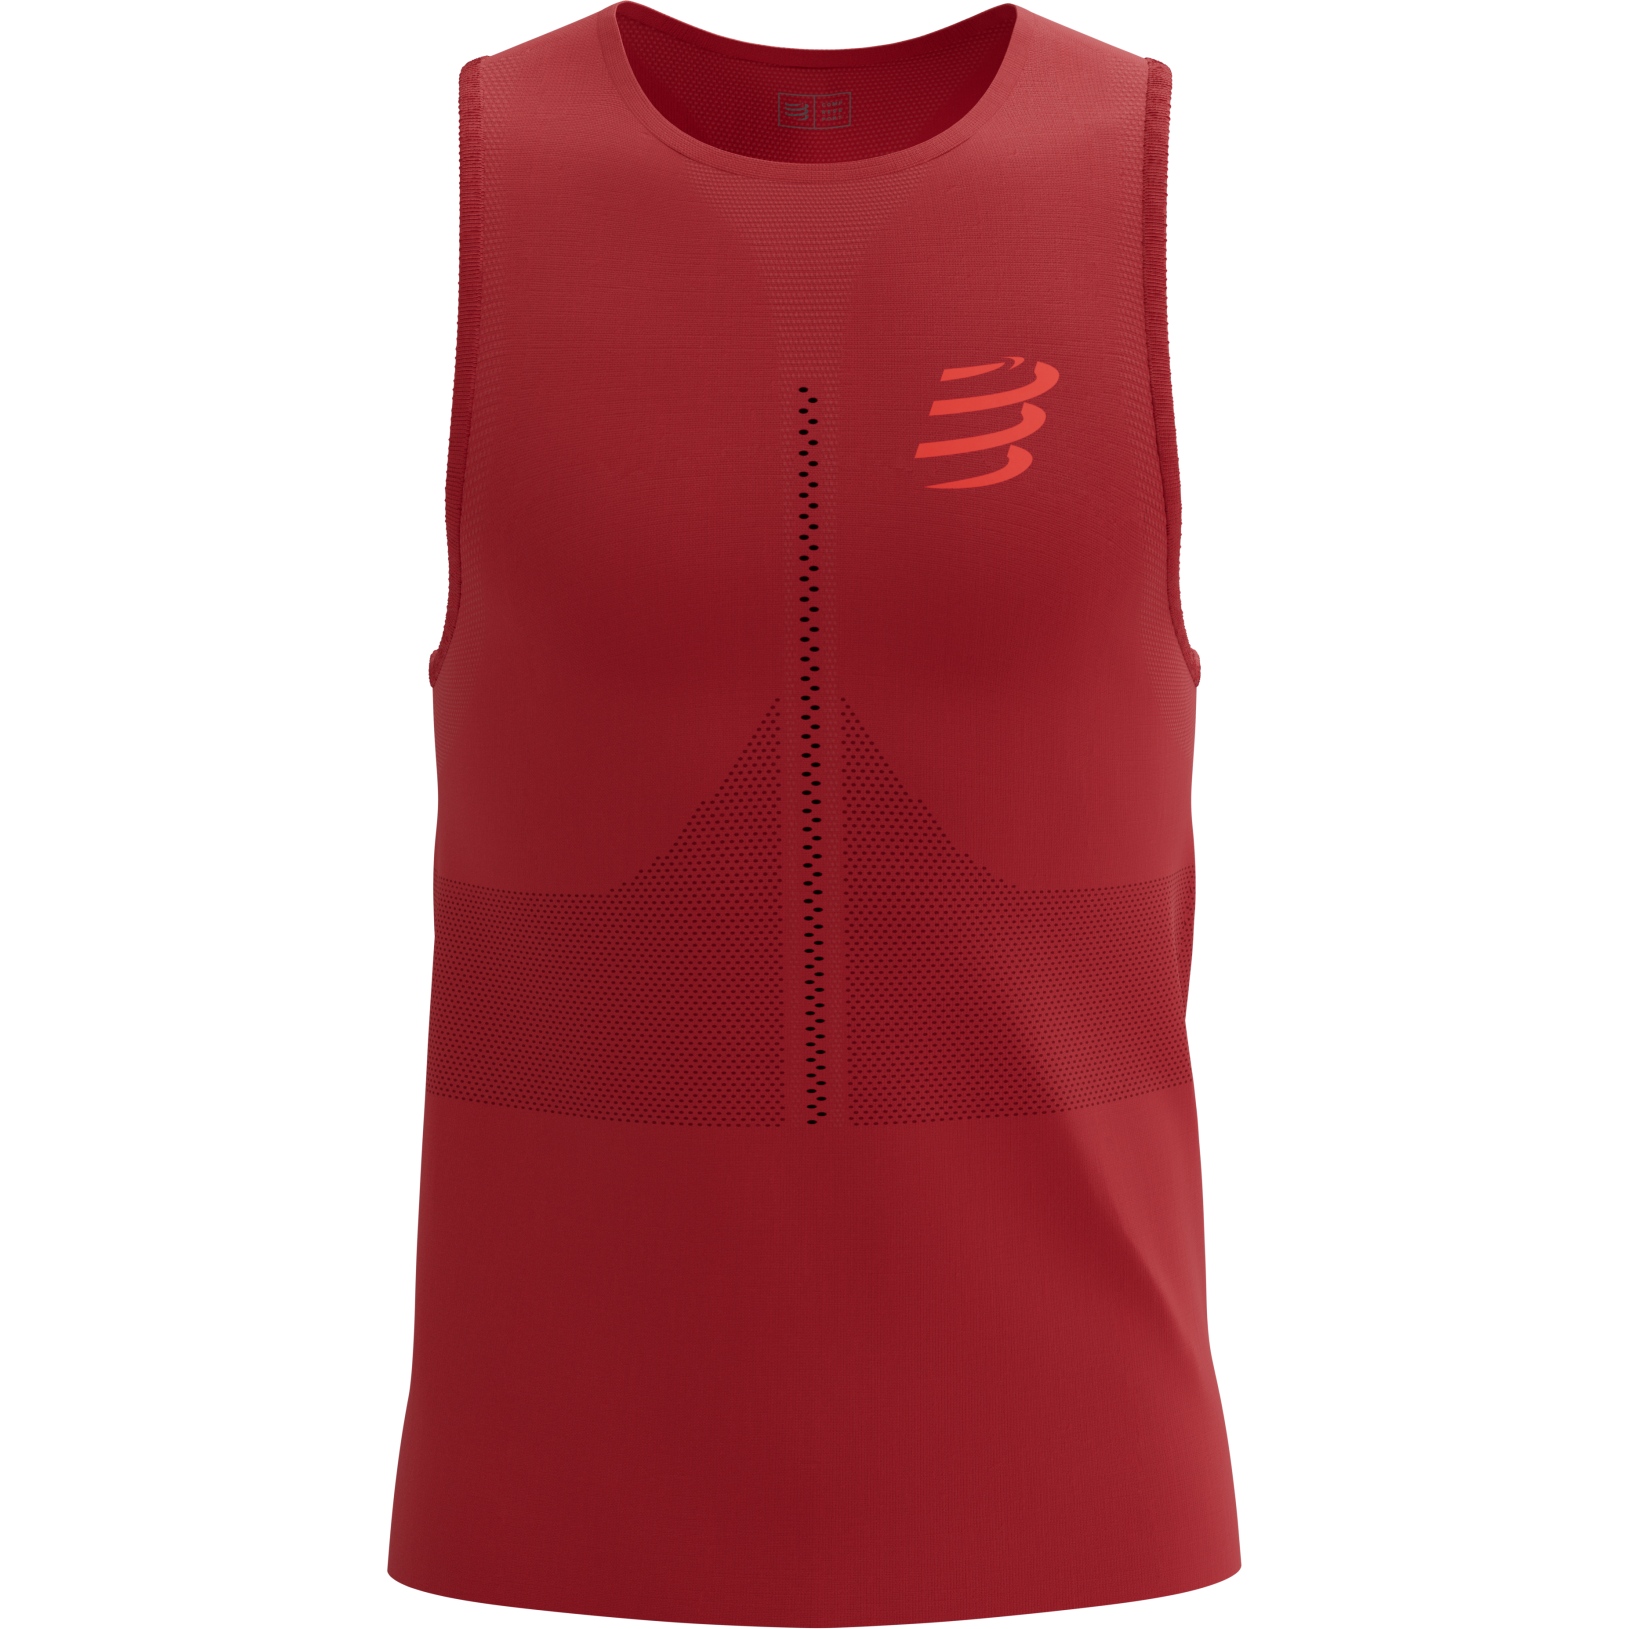 Picture of Compressport Pro Racing Singlet Men - samba/red reflective